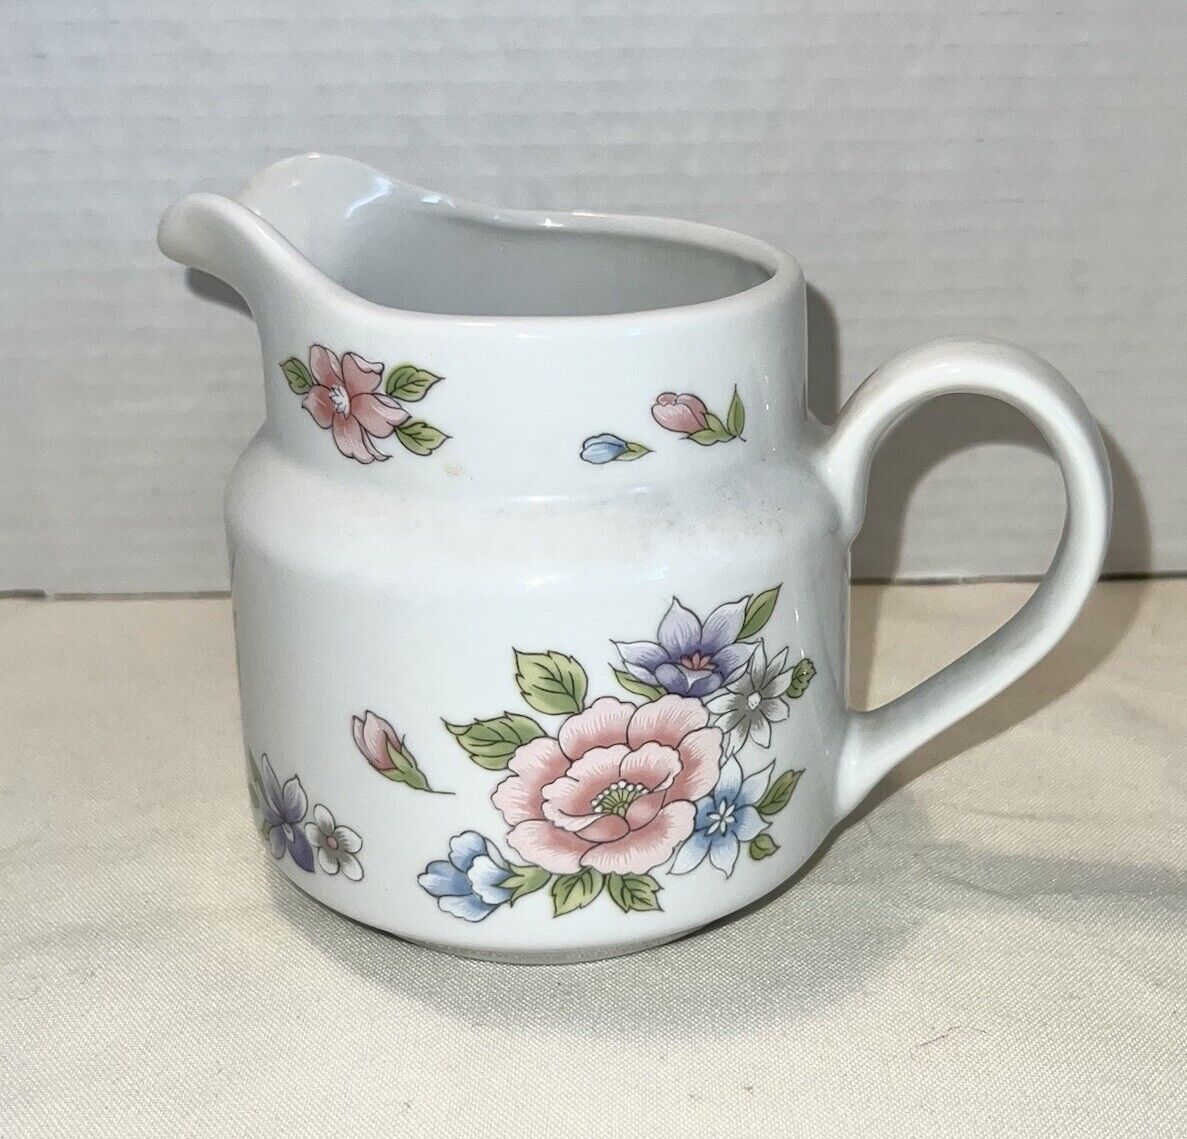 FTD Small Floral Pitcher “Especially for You” Made in Japan 1989 FTDA Vintage